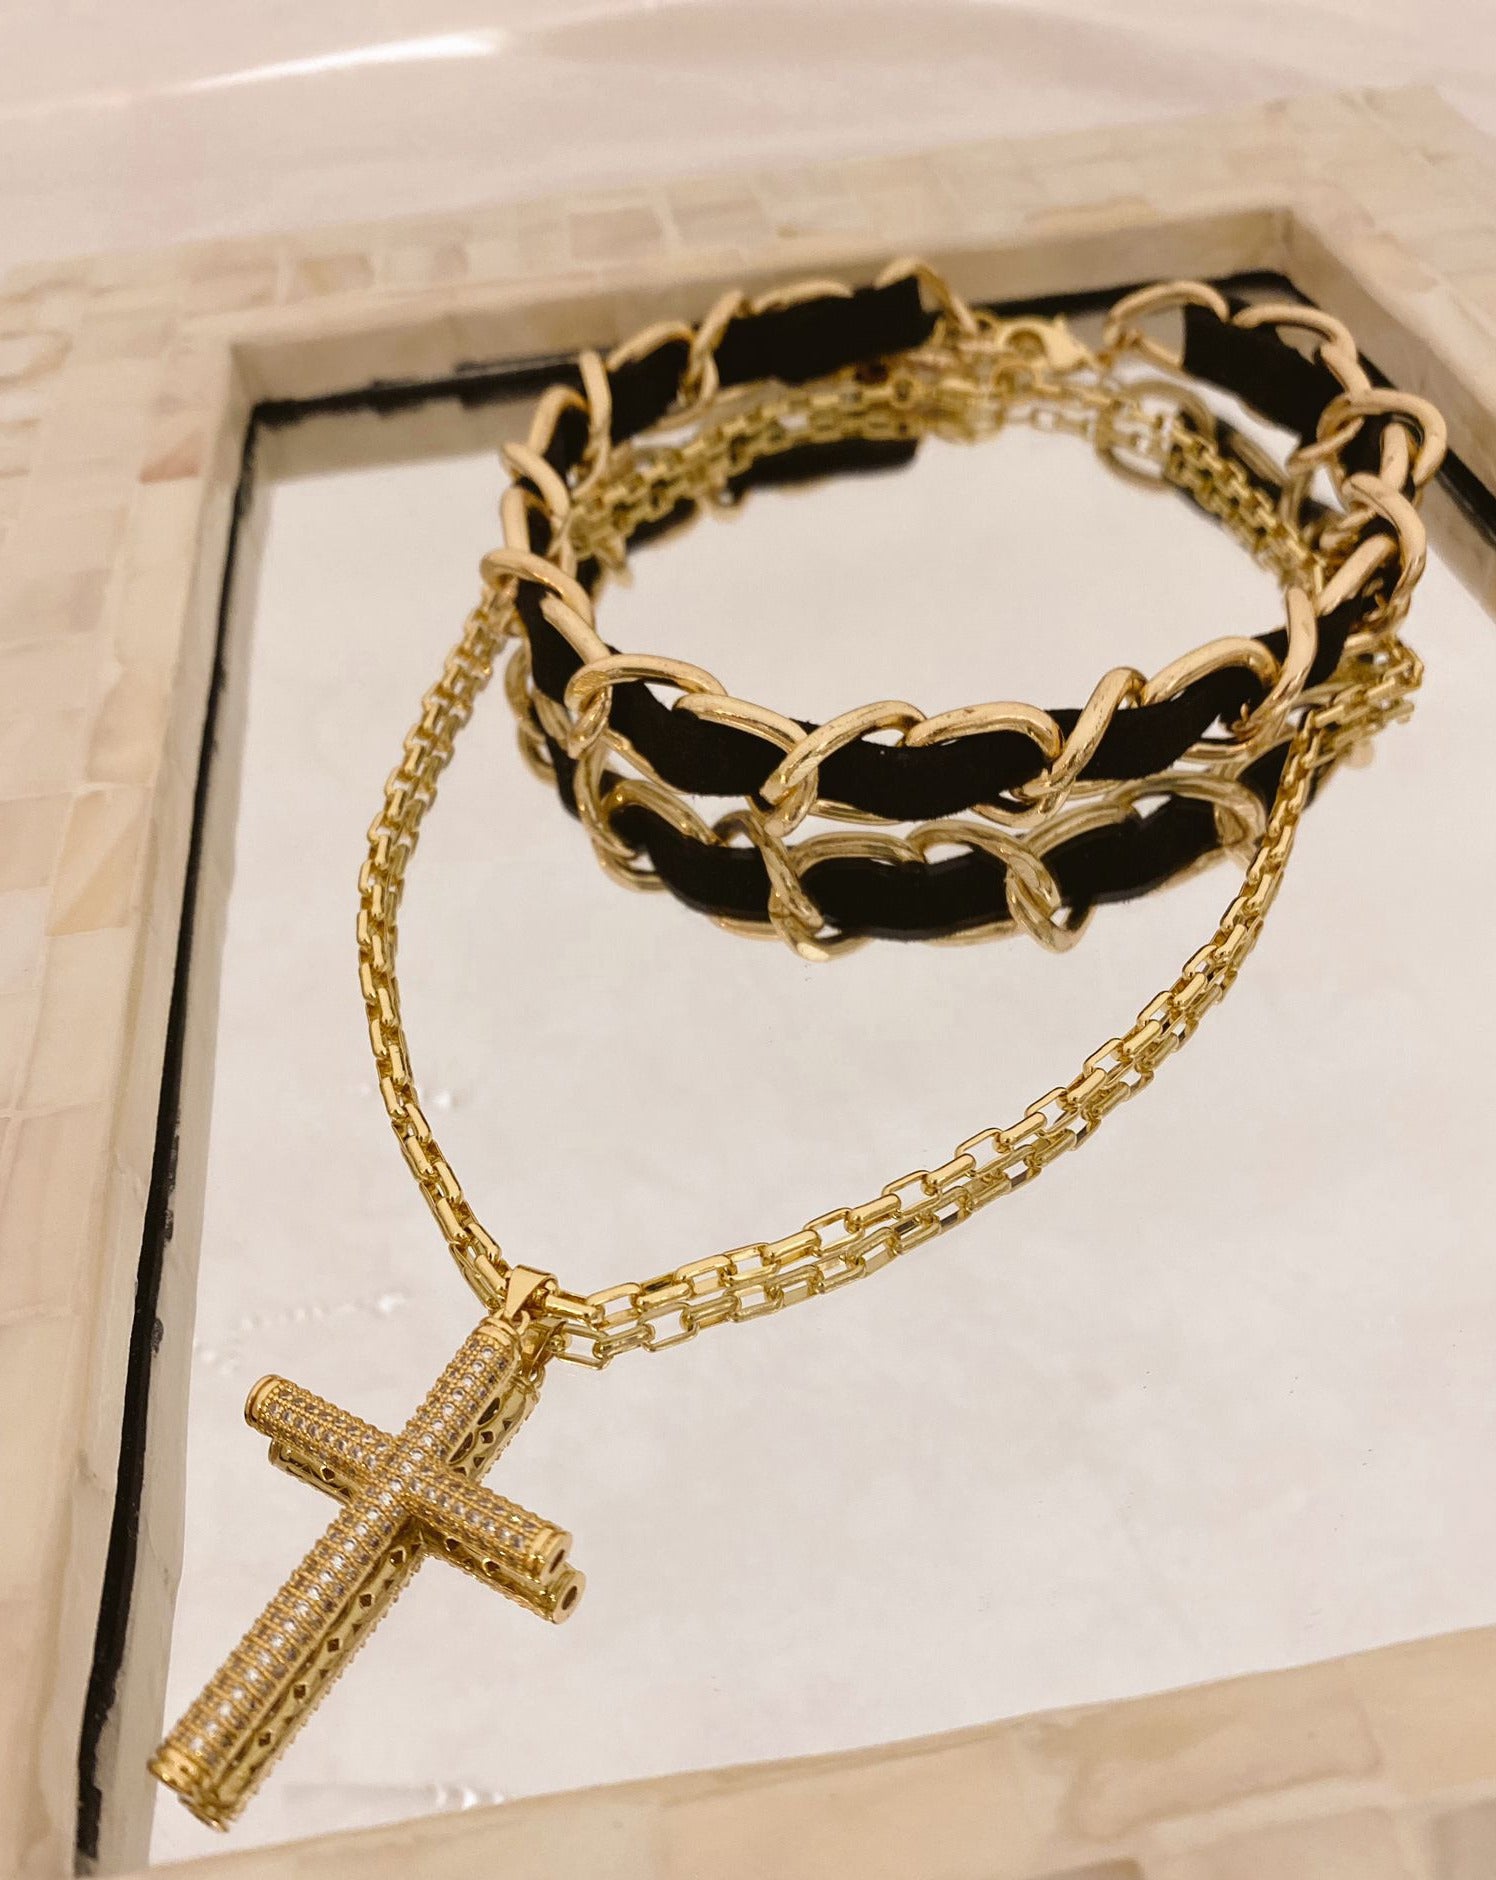 Gold Filled Chain with Cross